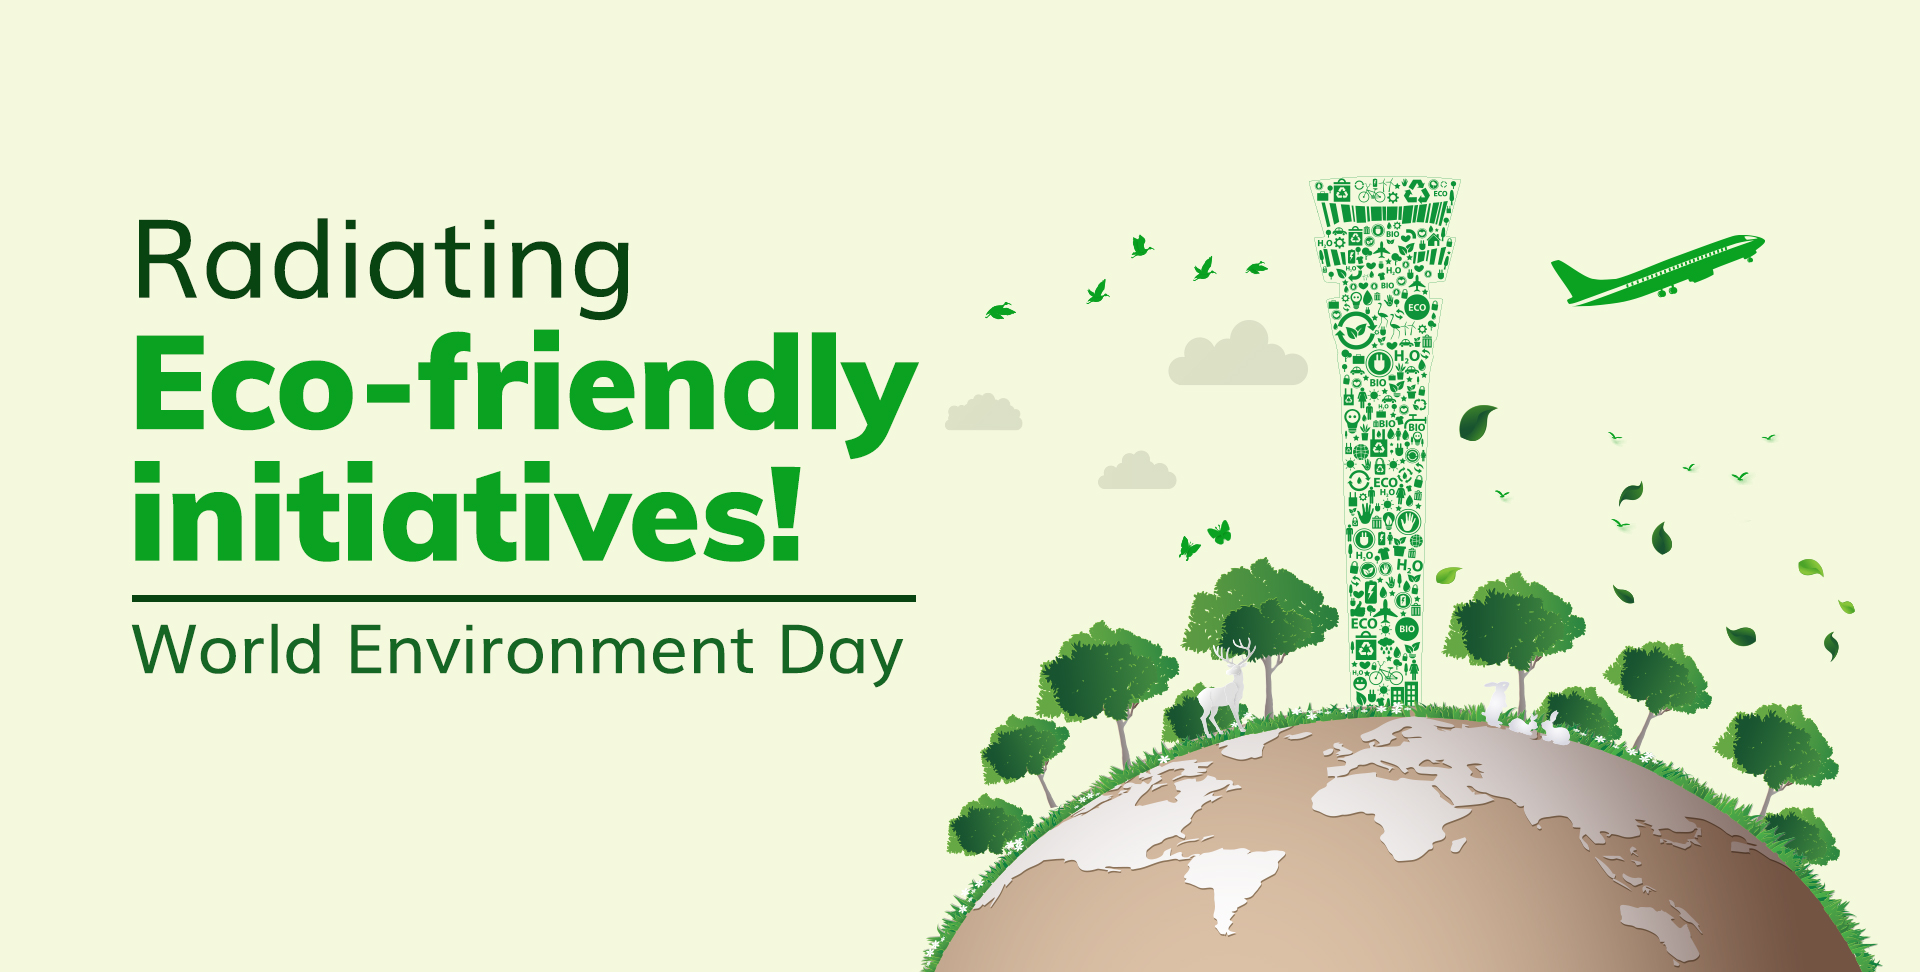 Delhi Airport Celebrates Environment Day With Environment-Friendly Initiatives